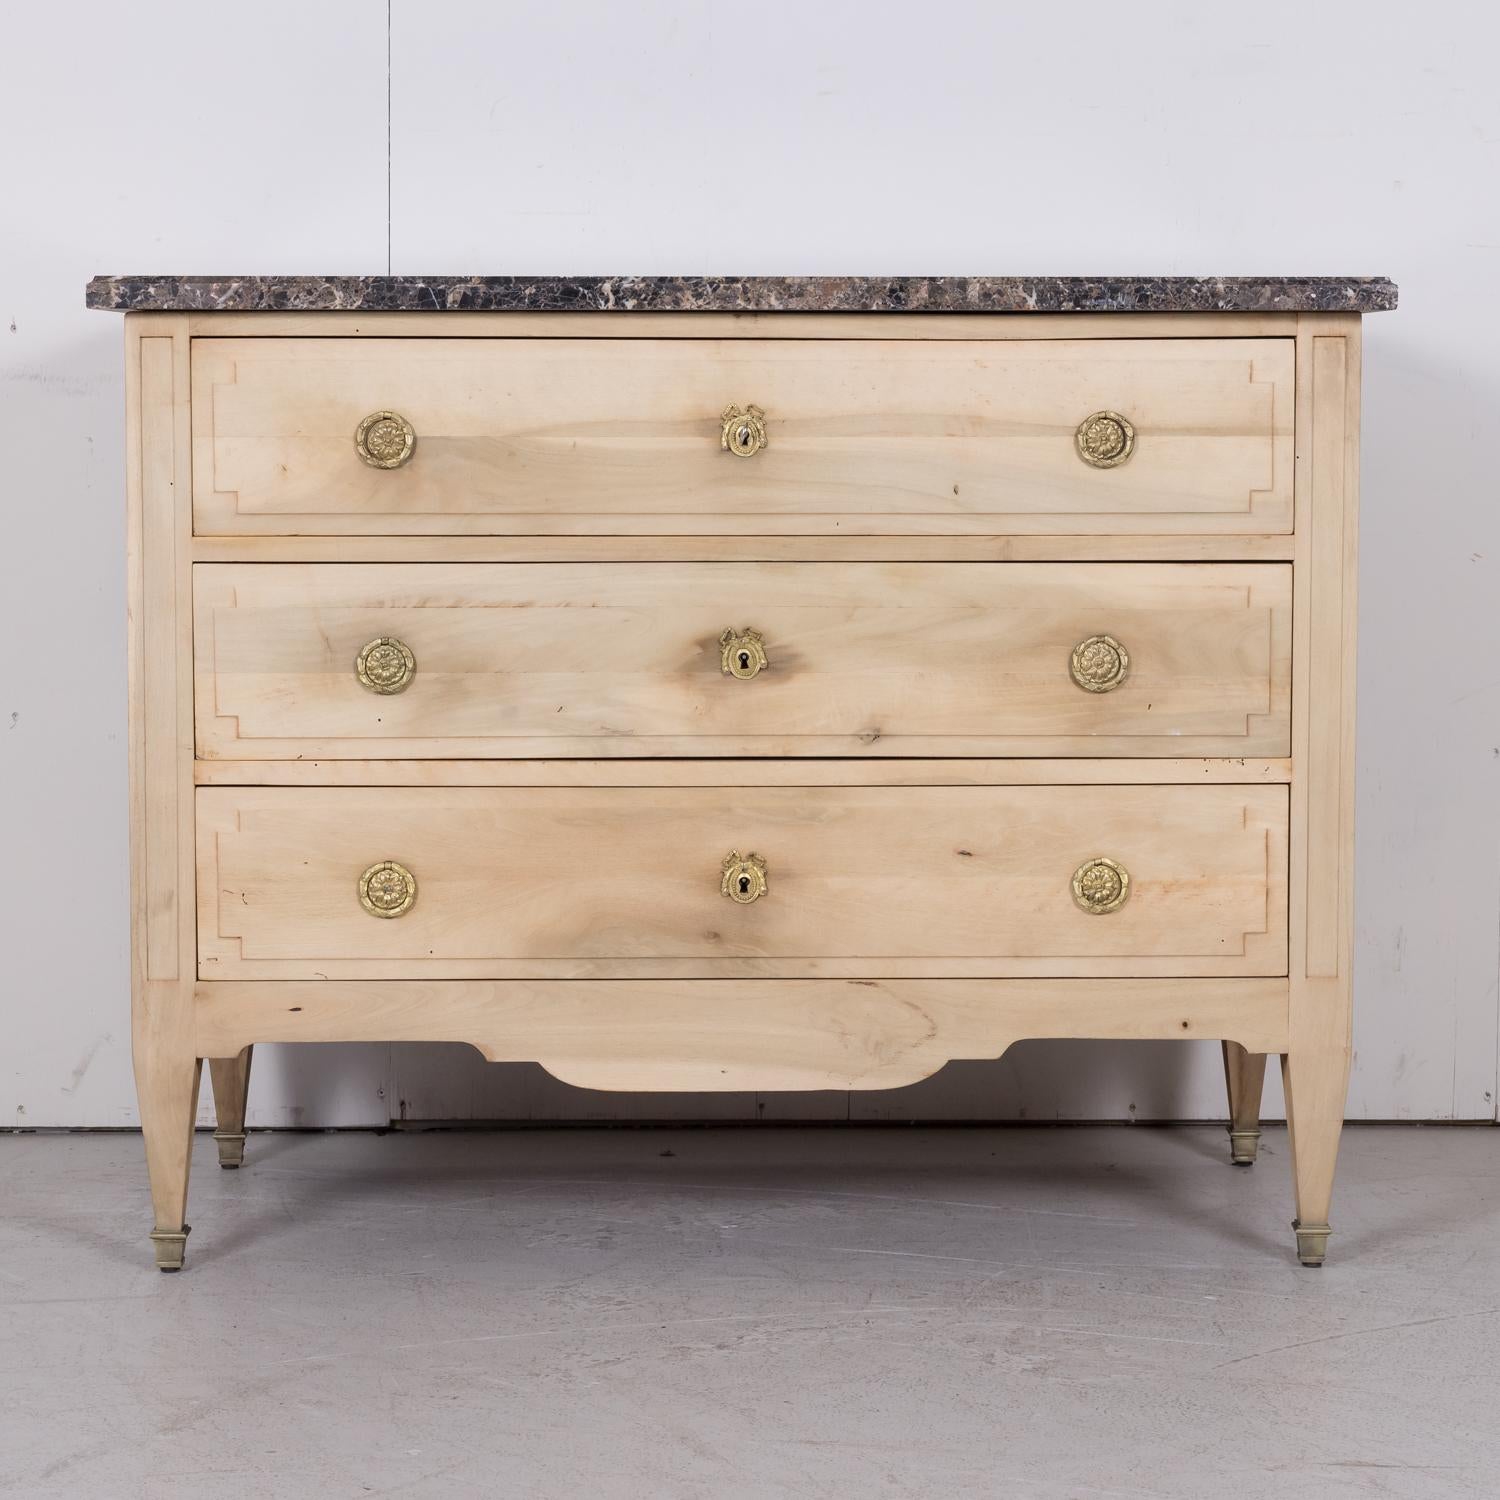 19th century French Louis XVI style bleached cherry commode, circa 1880s, having a beautiful dark emperador marble top above three drawers adorned with original brass neoclassical pulls and ribbon escutcheons. Raised on short tapered legs ending in